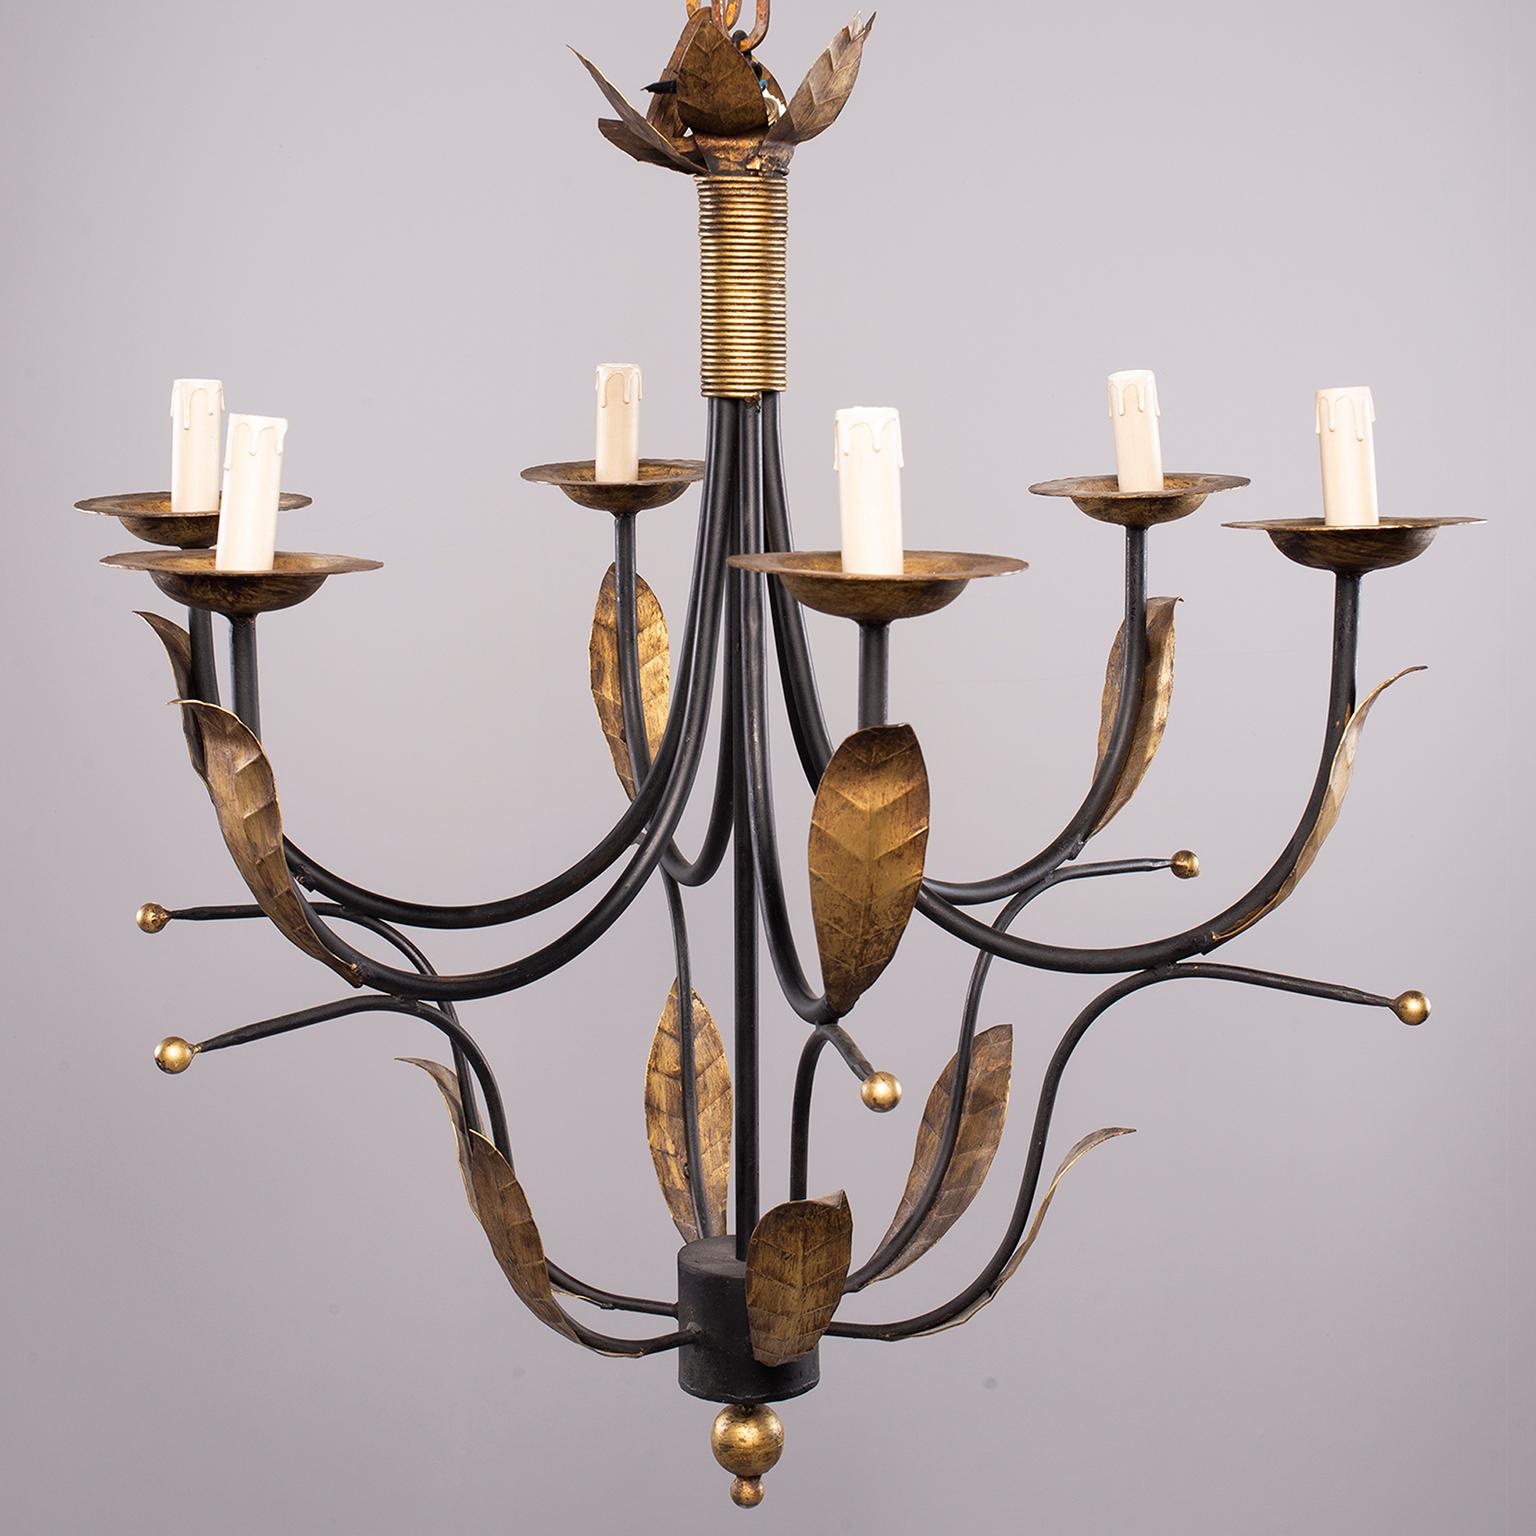 Pair of Spanish chandeliers have black wrought iron frames with gilded metal leaf accents and six candle style candelabra sized lights, circa 1960s. Unknown maker. Chandeliers have been rewired for US electrical standards. Sold and priced as a